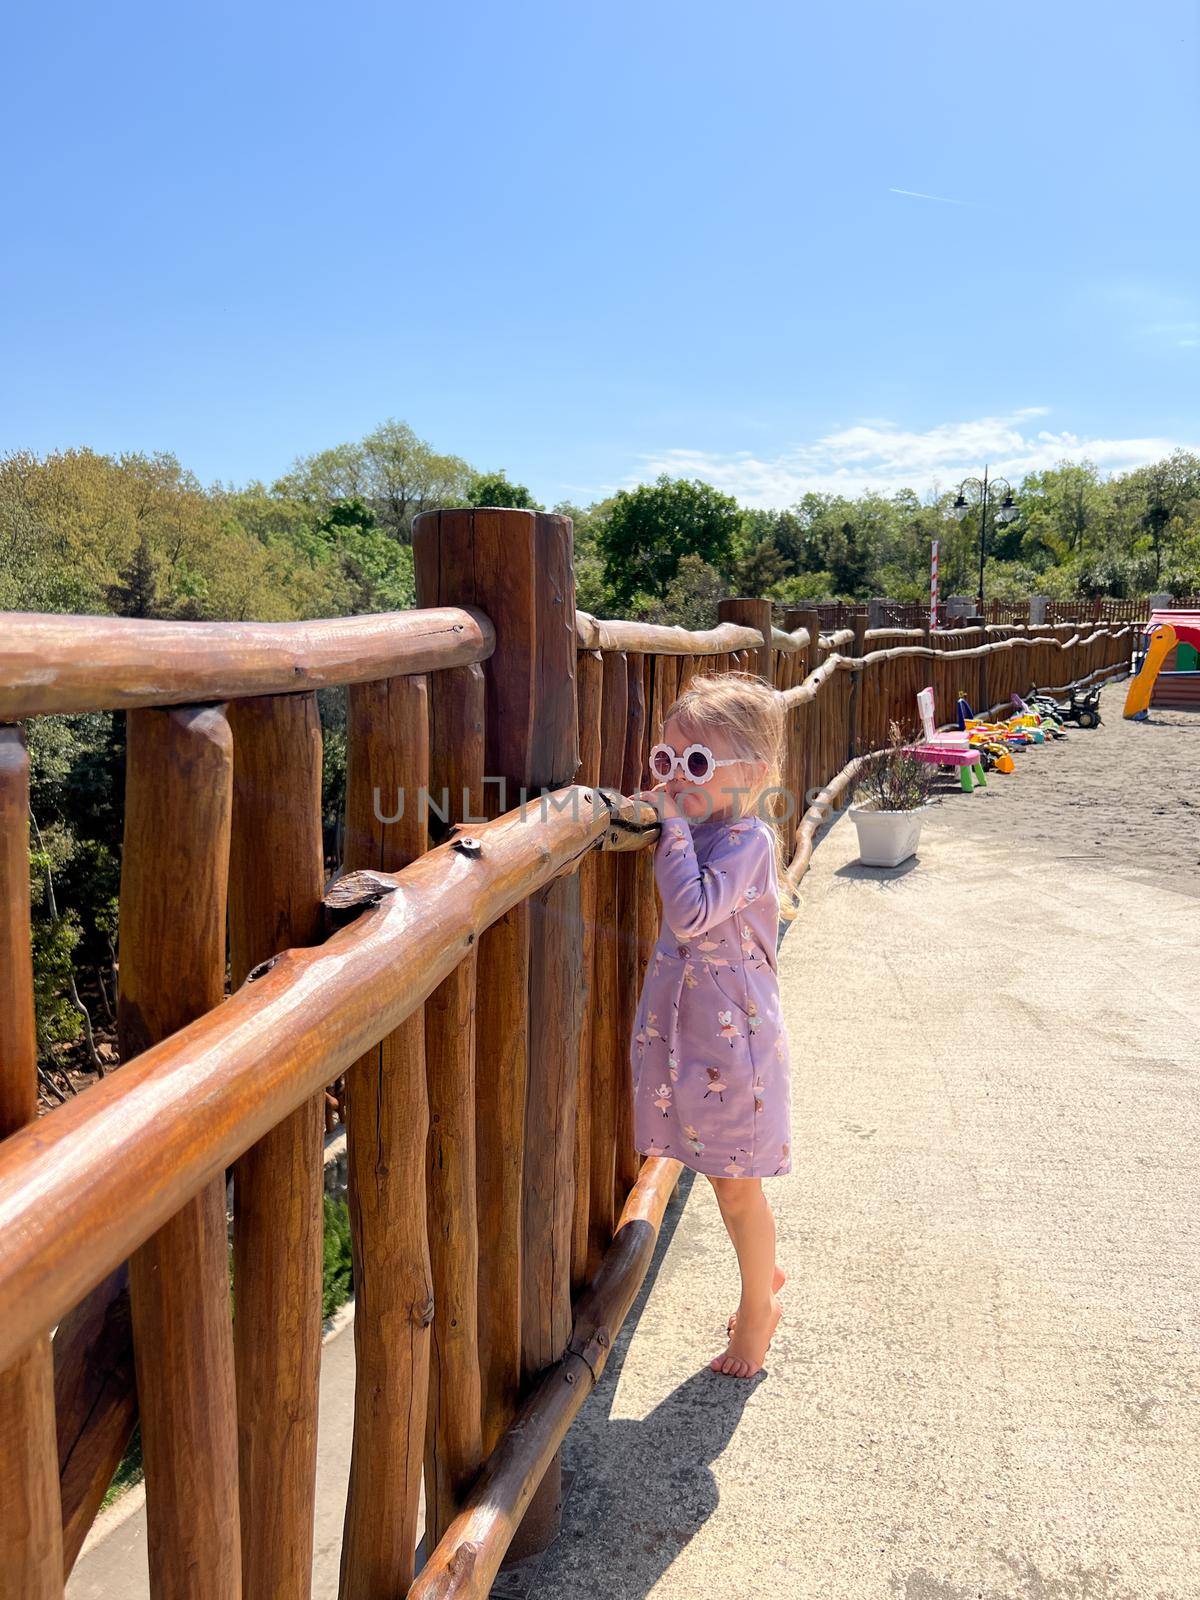 Little girl looks through the boards of a wooden fence in the park. High quality photo